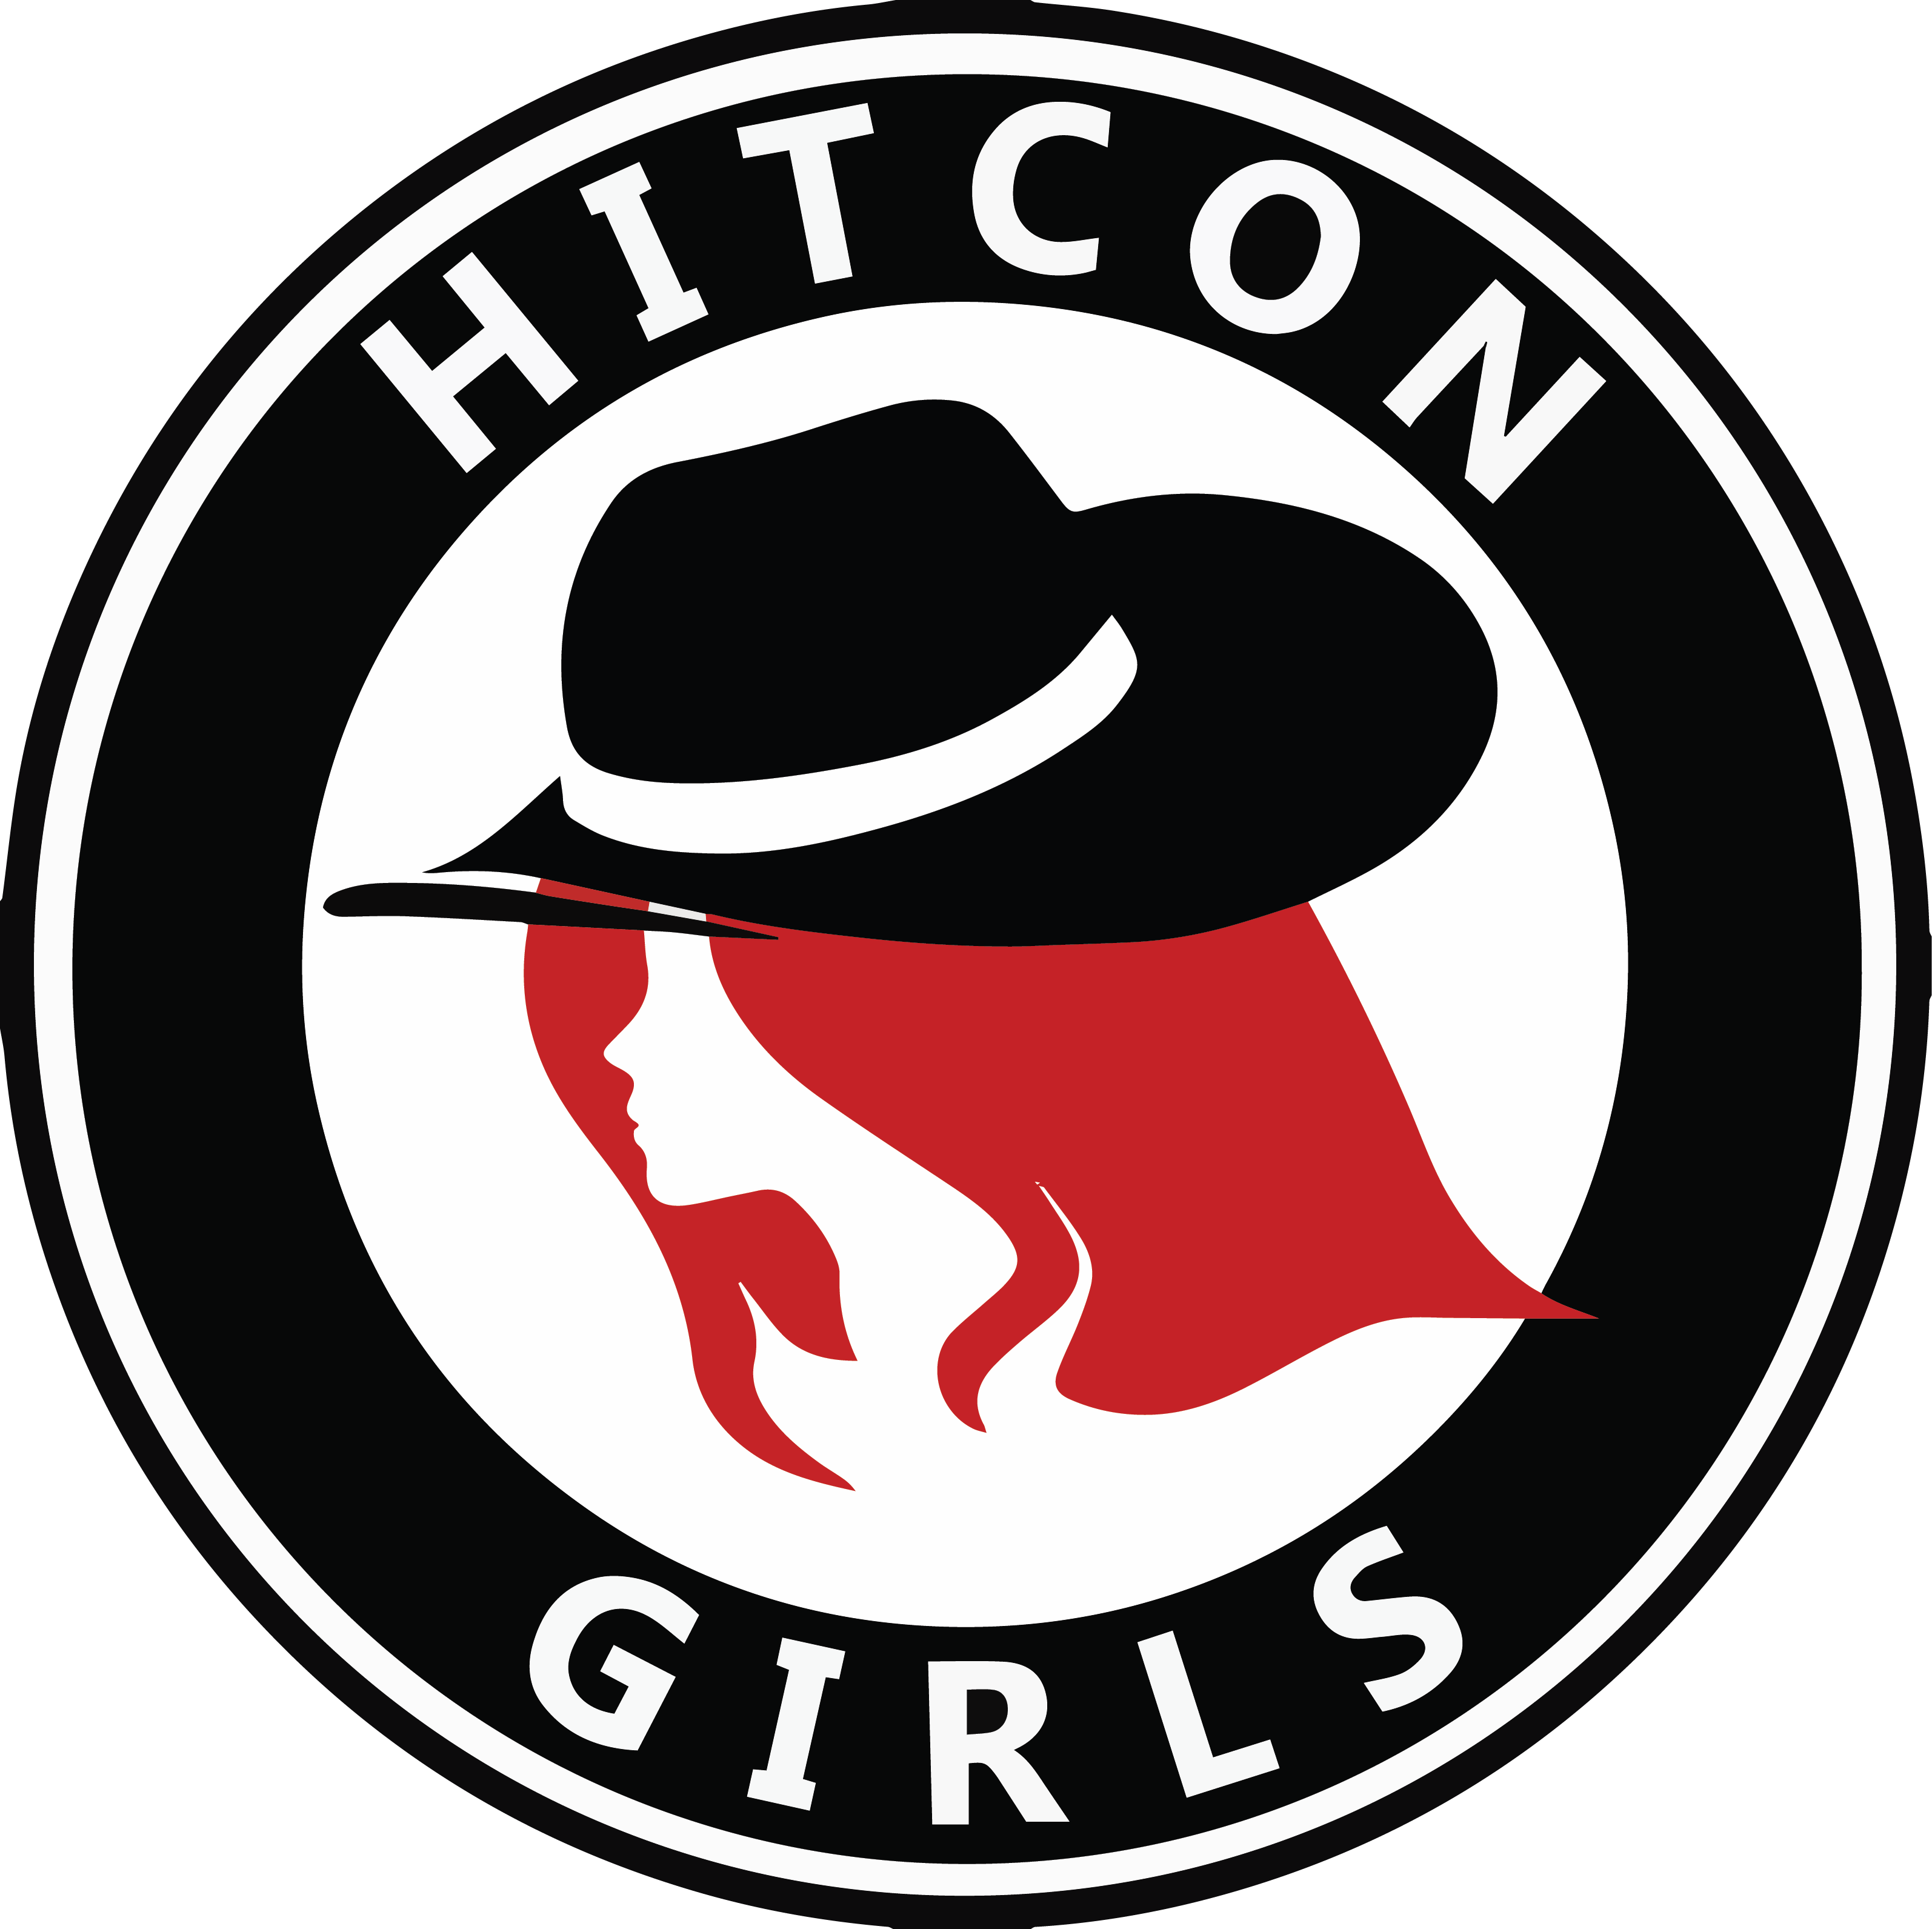 The HITCON GIRLS logo was designed by co-founder Ashley Shen to illustrate that not all hackers are men. 